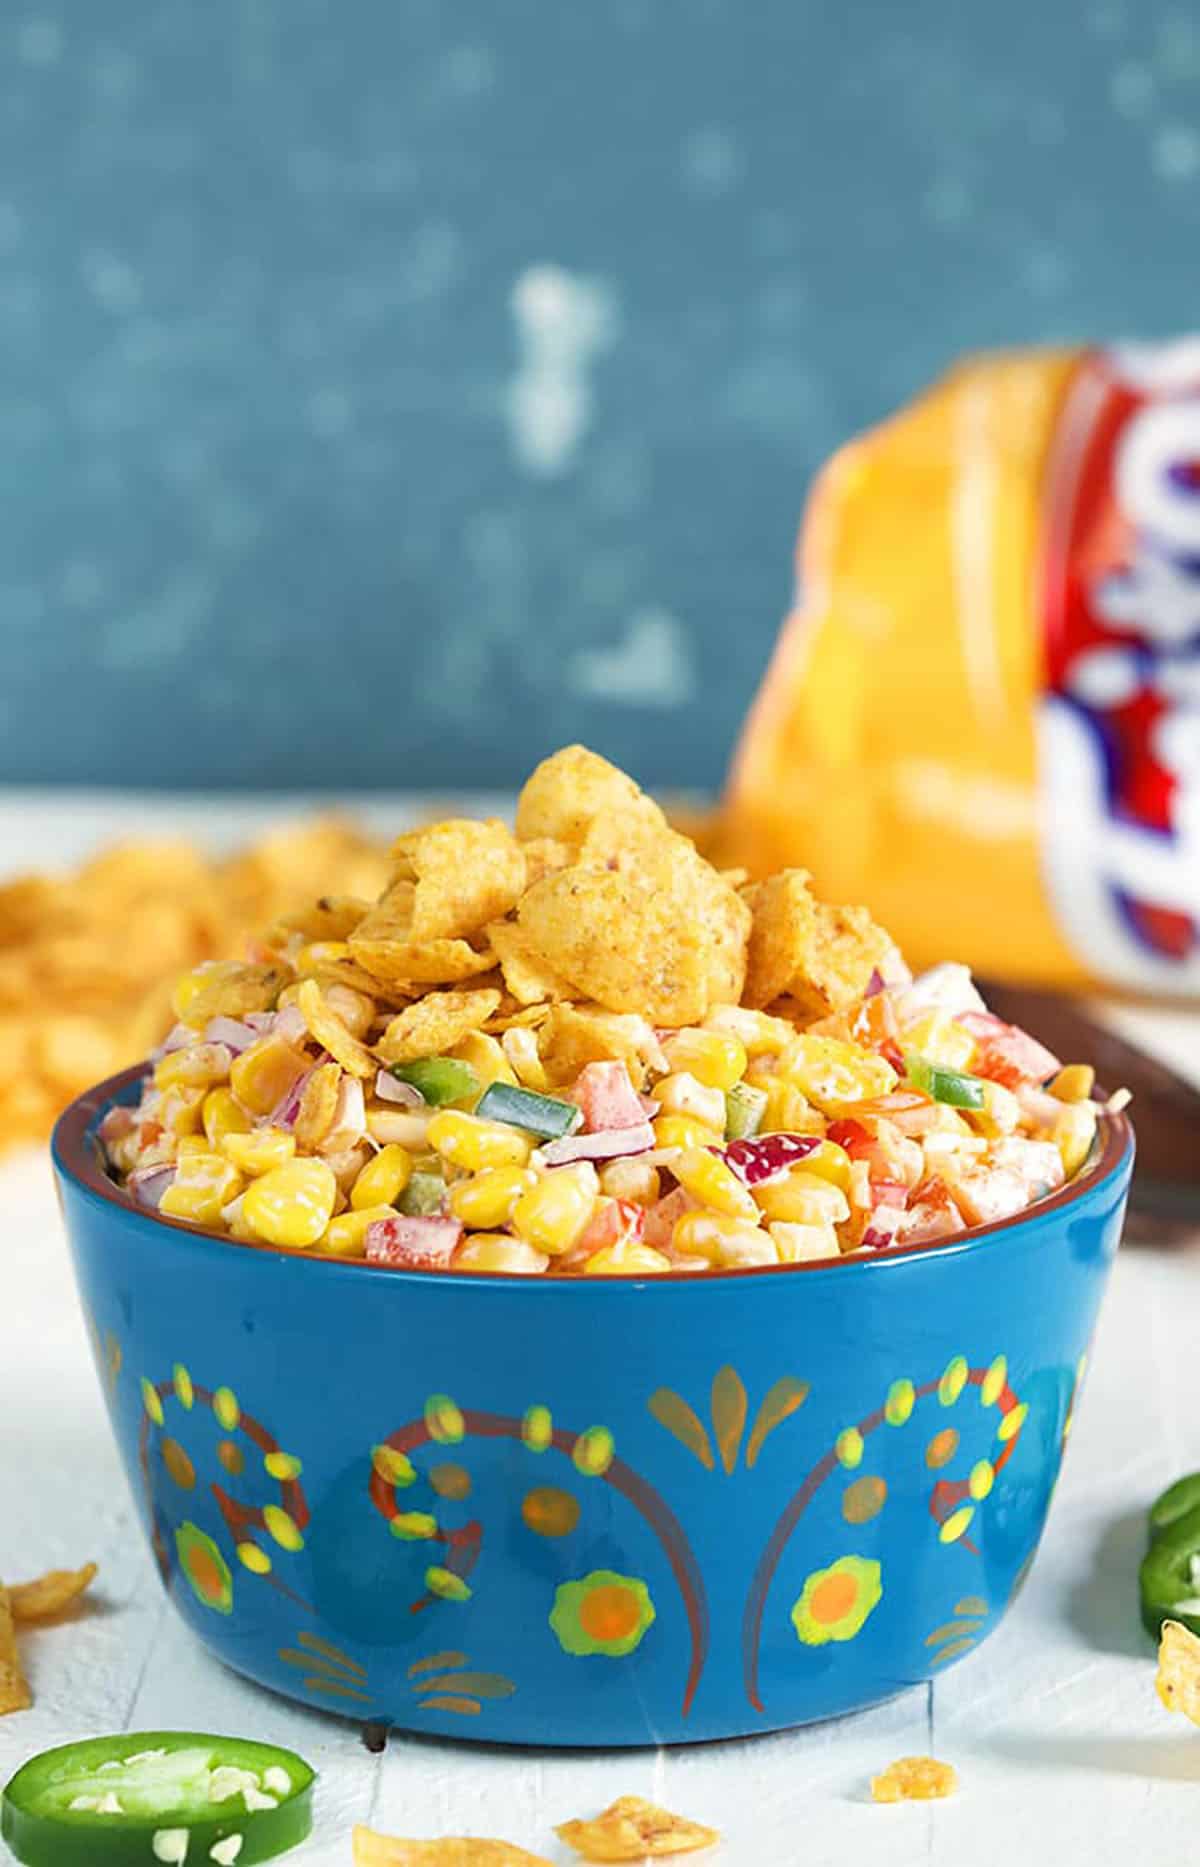 FritoCorn Salad in a blue terra cotta bowl with a bag of Fritos in the background.